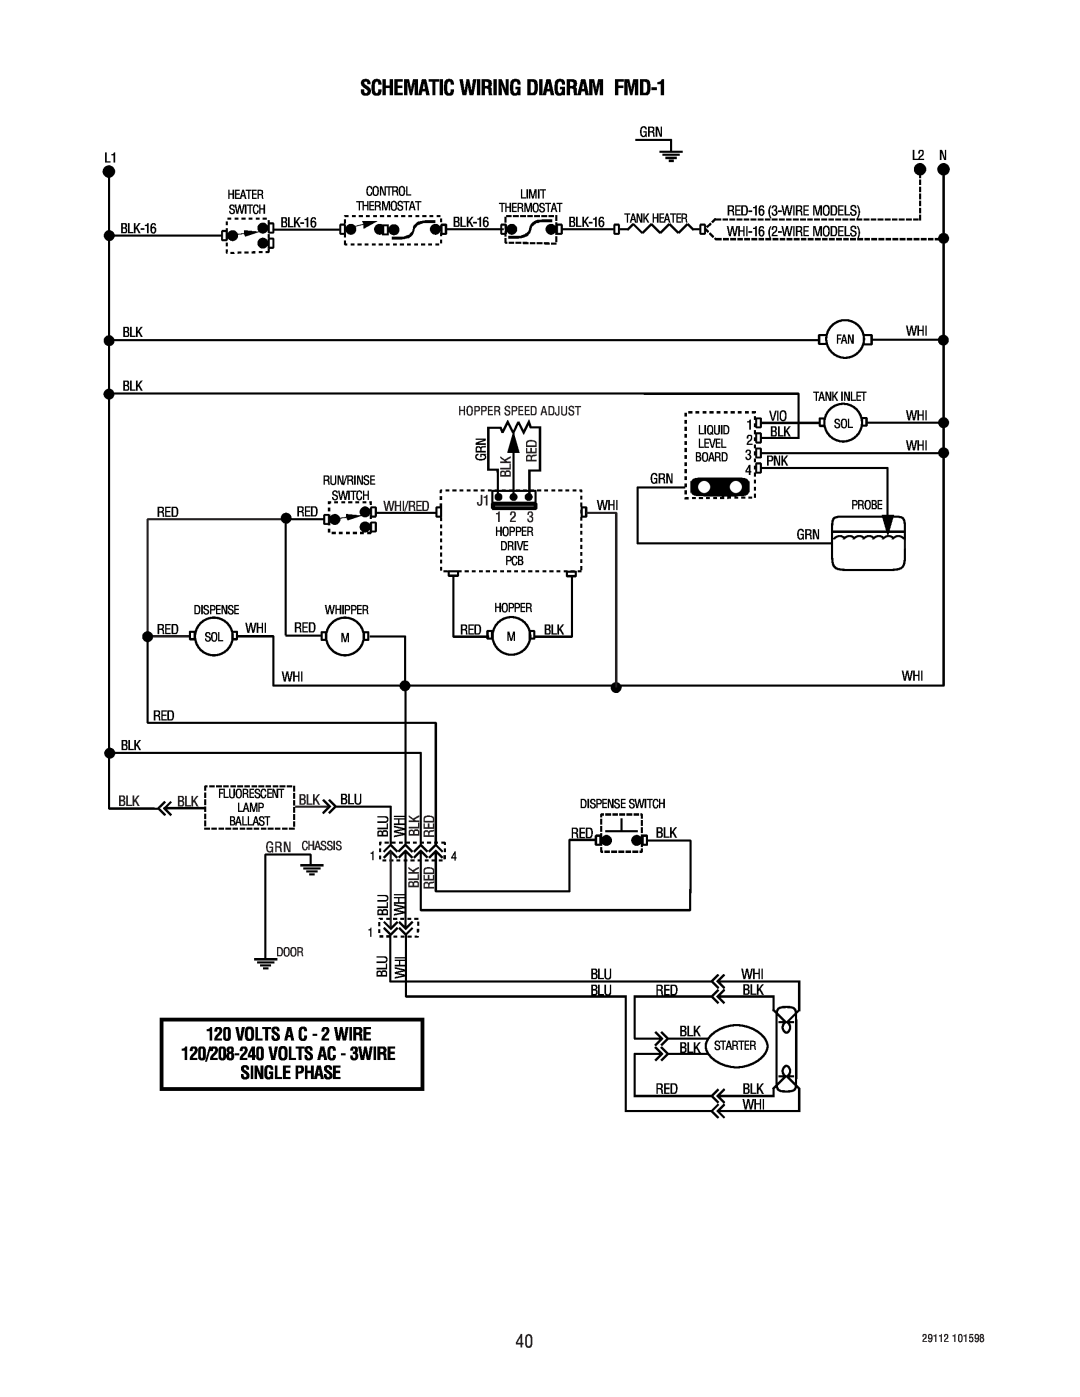 Bunn FMD-1 FMD-2 SCHEMATIC WIRING DIAGRAM FMD-1, VOLTS A C - 2 WIRE 120/208-240 VOLTS AC - 3WIRE SINGLE PHASE 